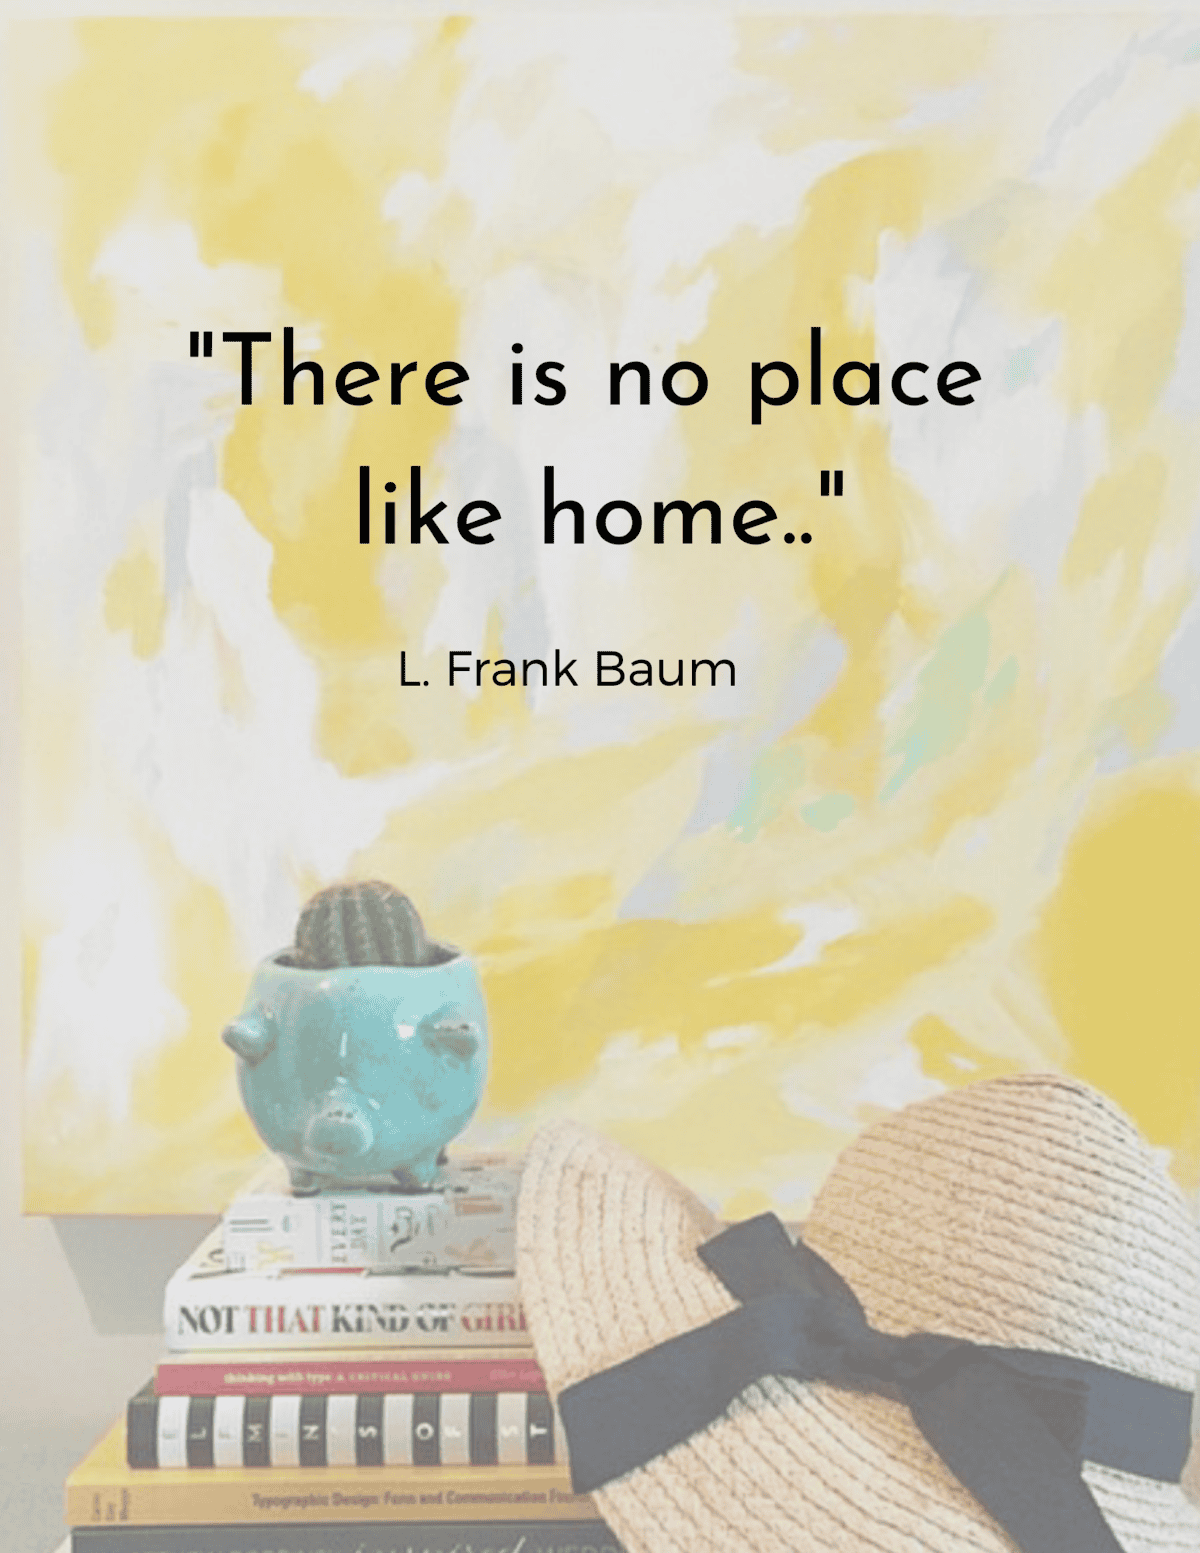 There is no place like home quote over yellow abstract art